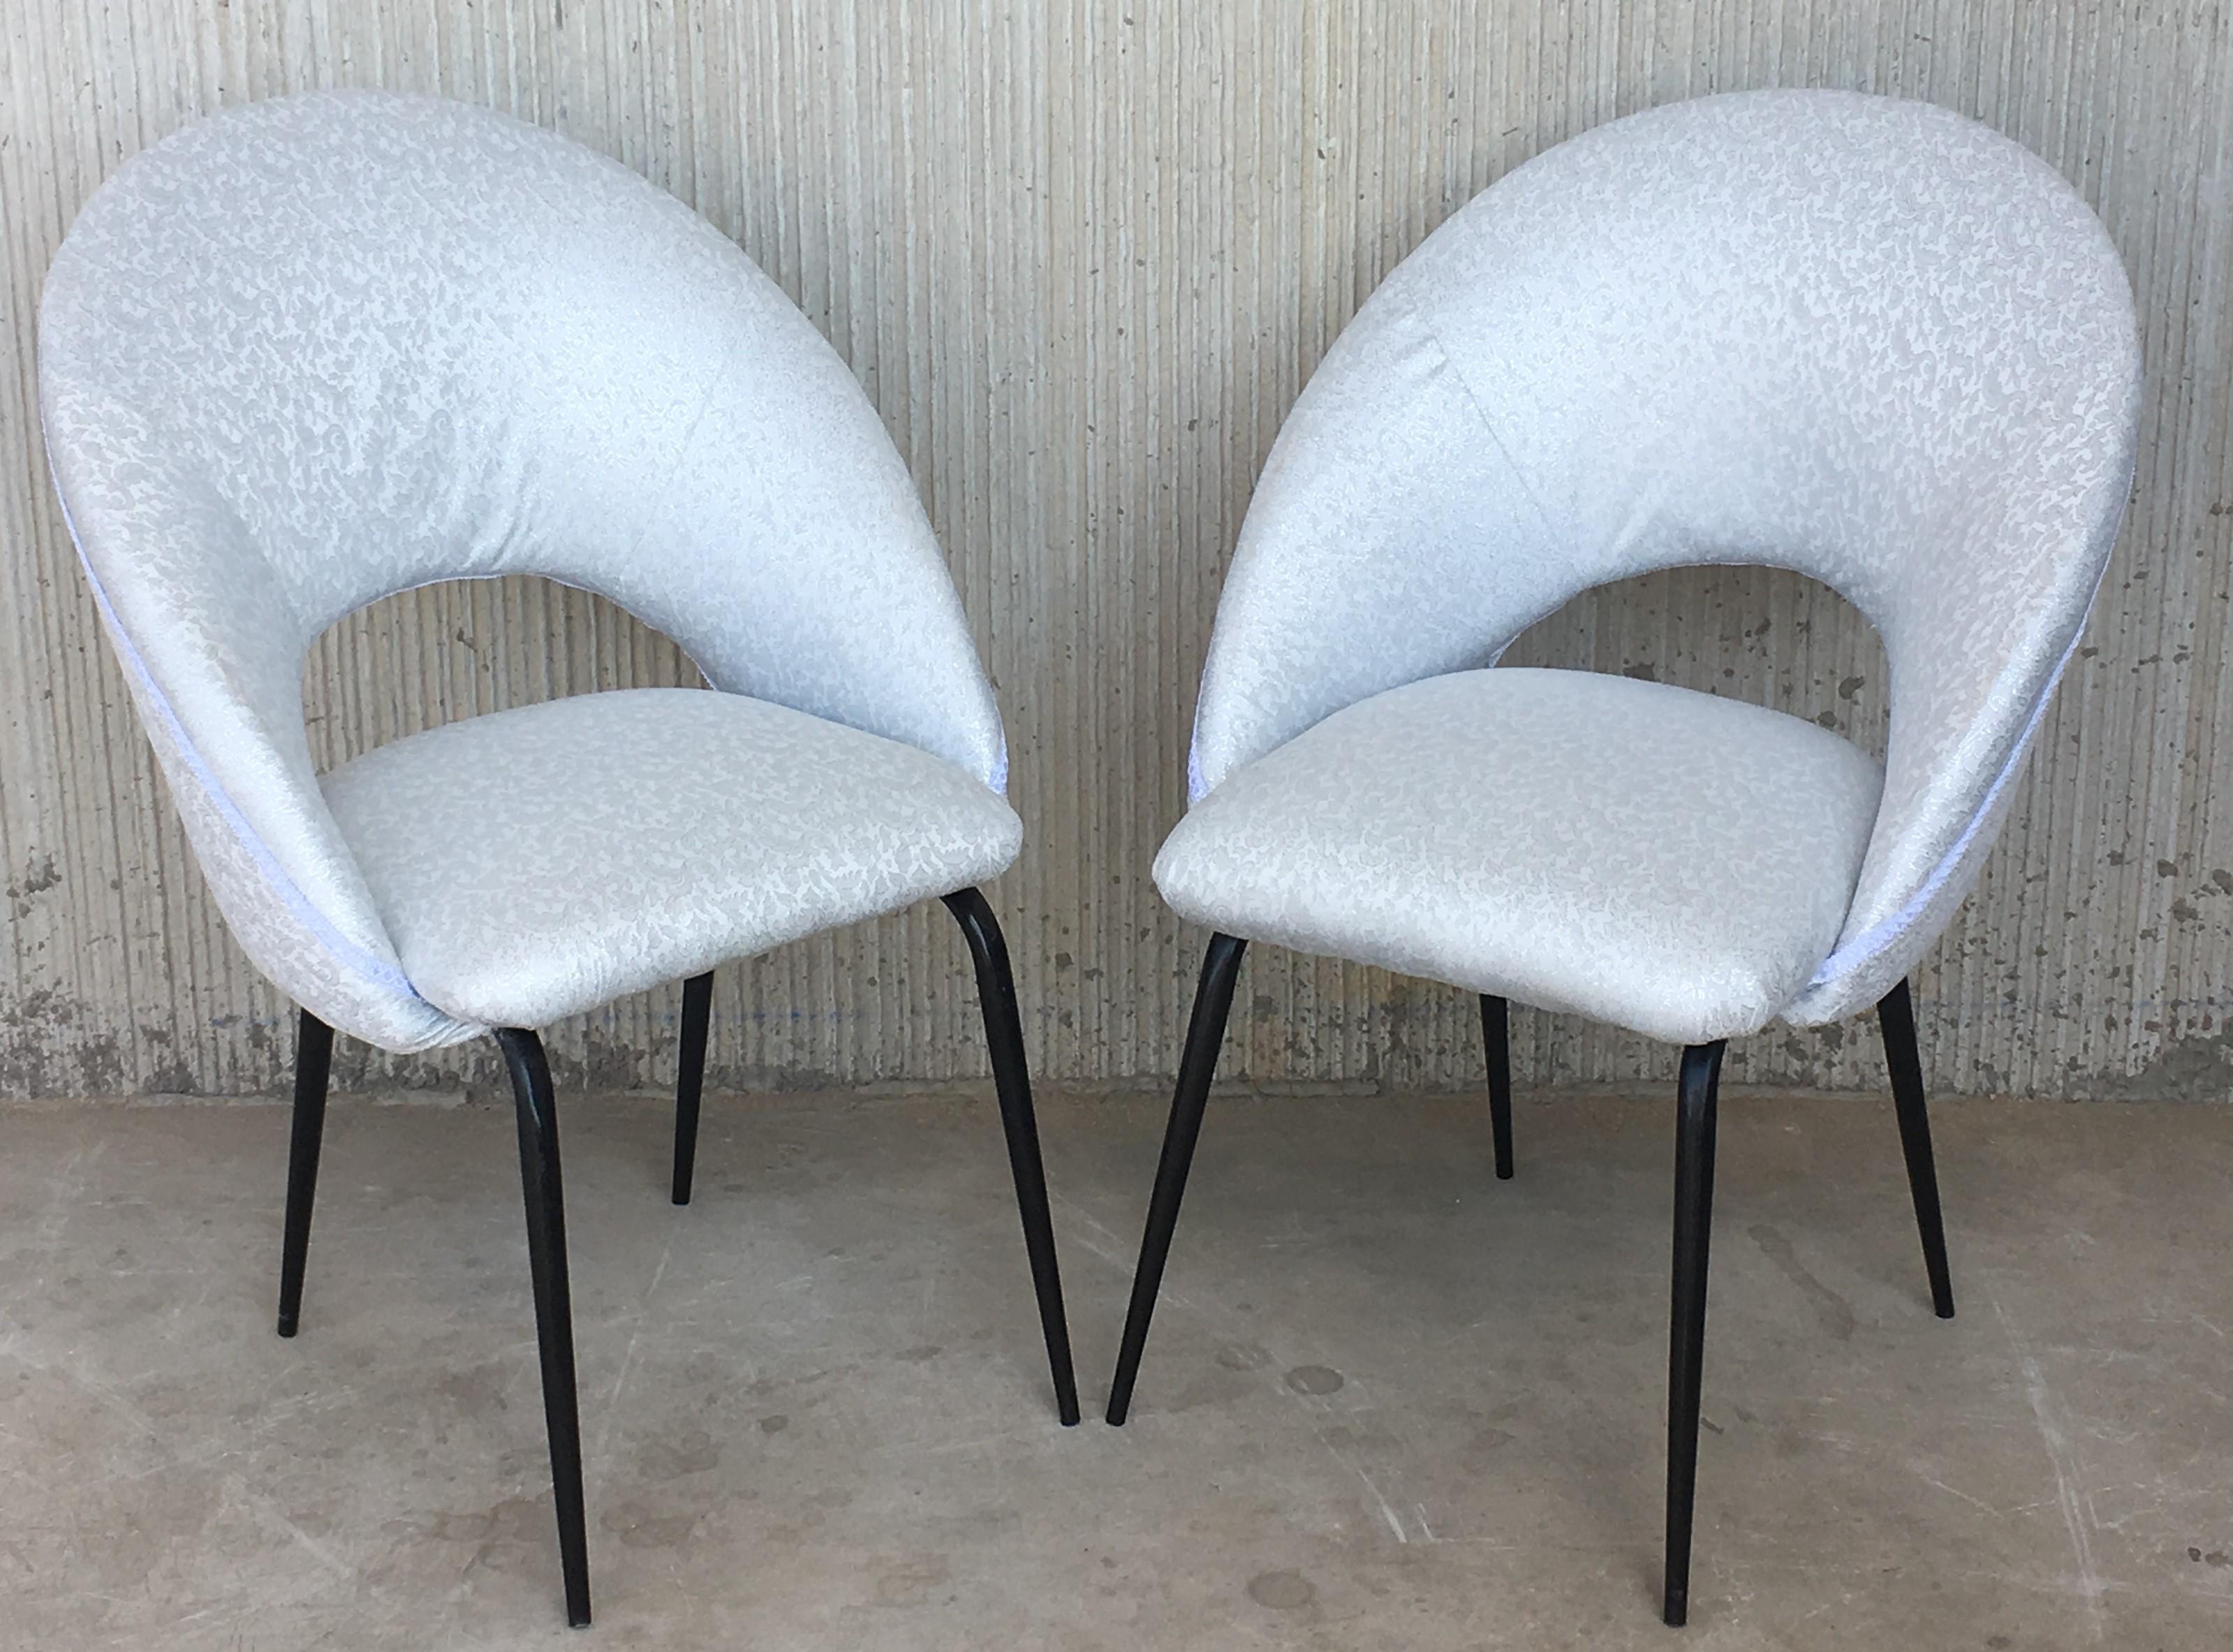 20th Century Midcentury Pair of Italian Chairs with Arched Seats and Arched Backrest